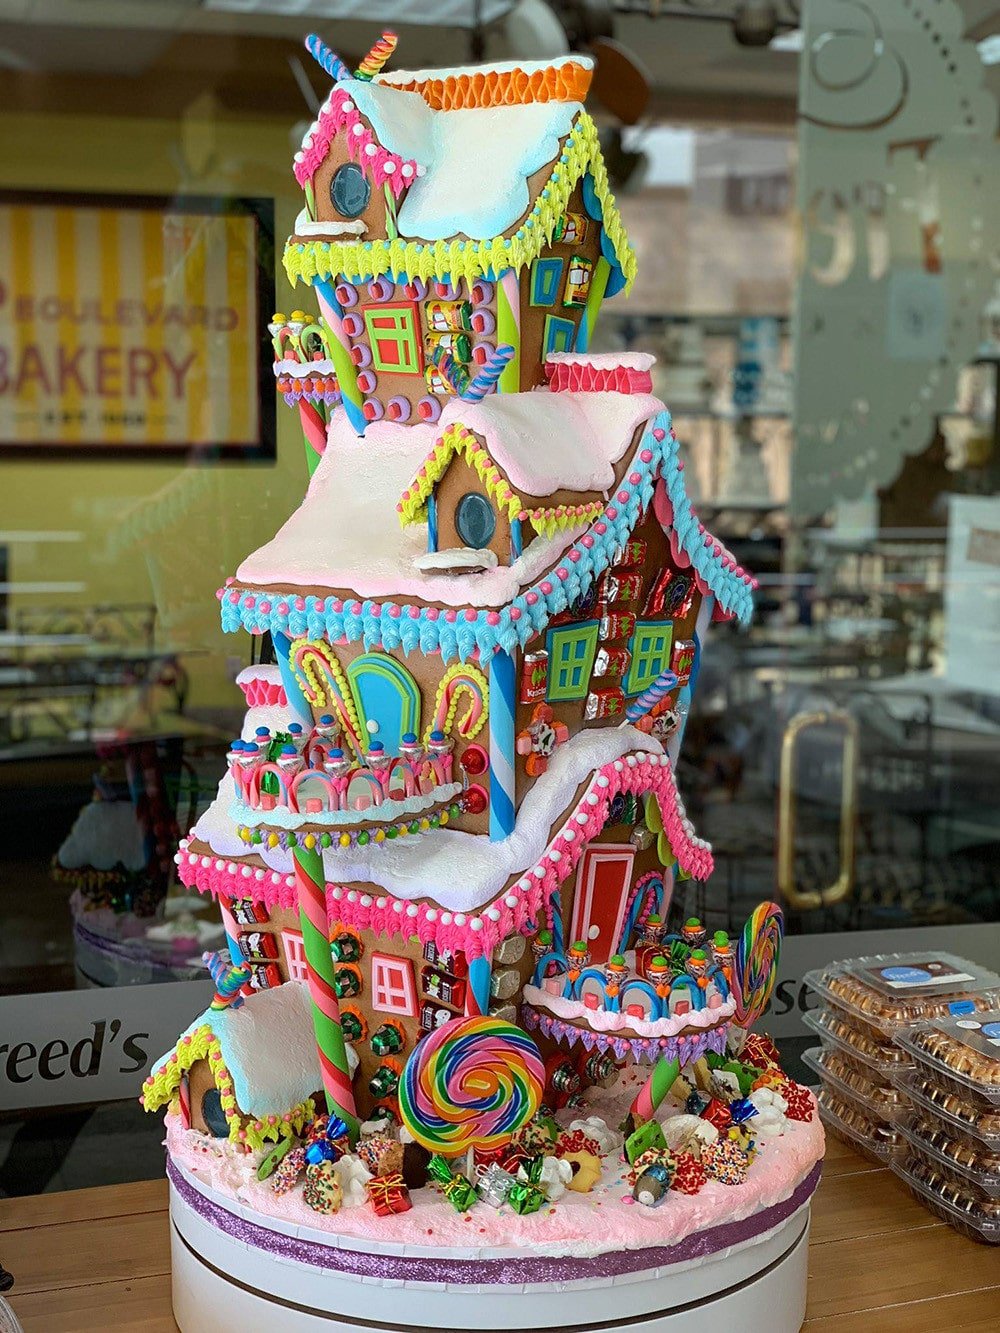 Amazing gingerbread house display made by Sonny Robertson of Freed's bakery in Las Vegas. I love the colors so much!